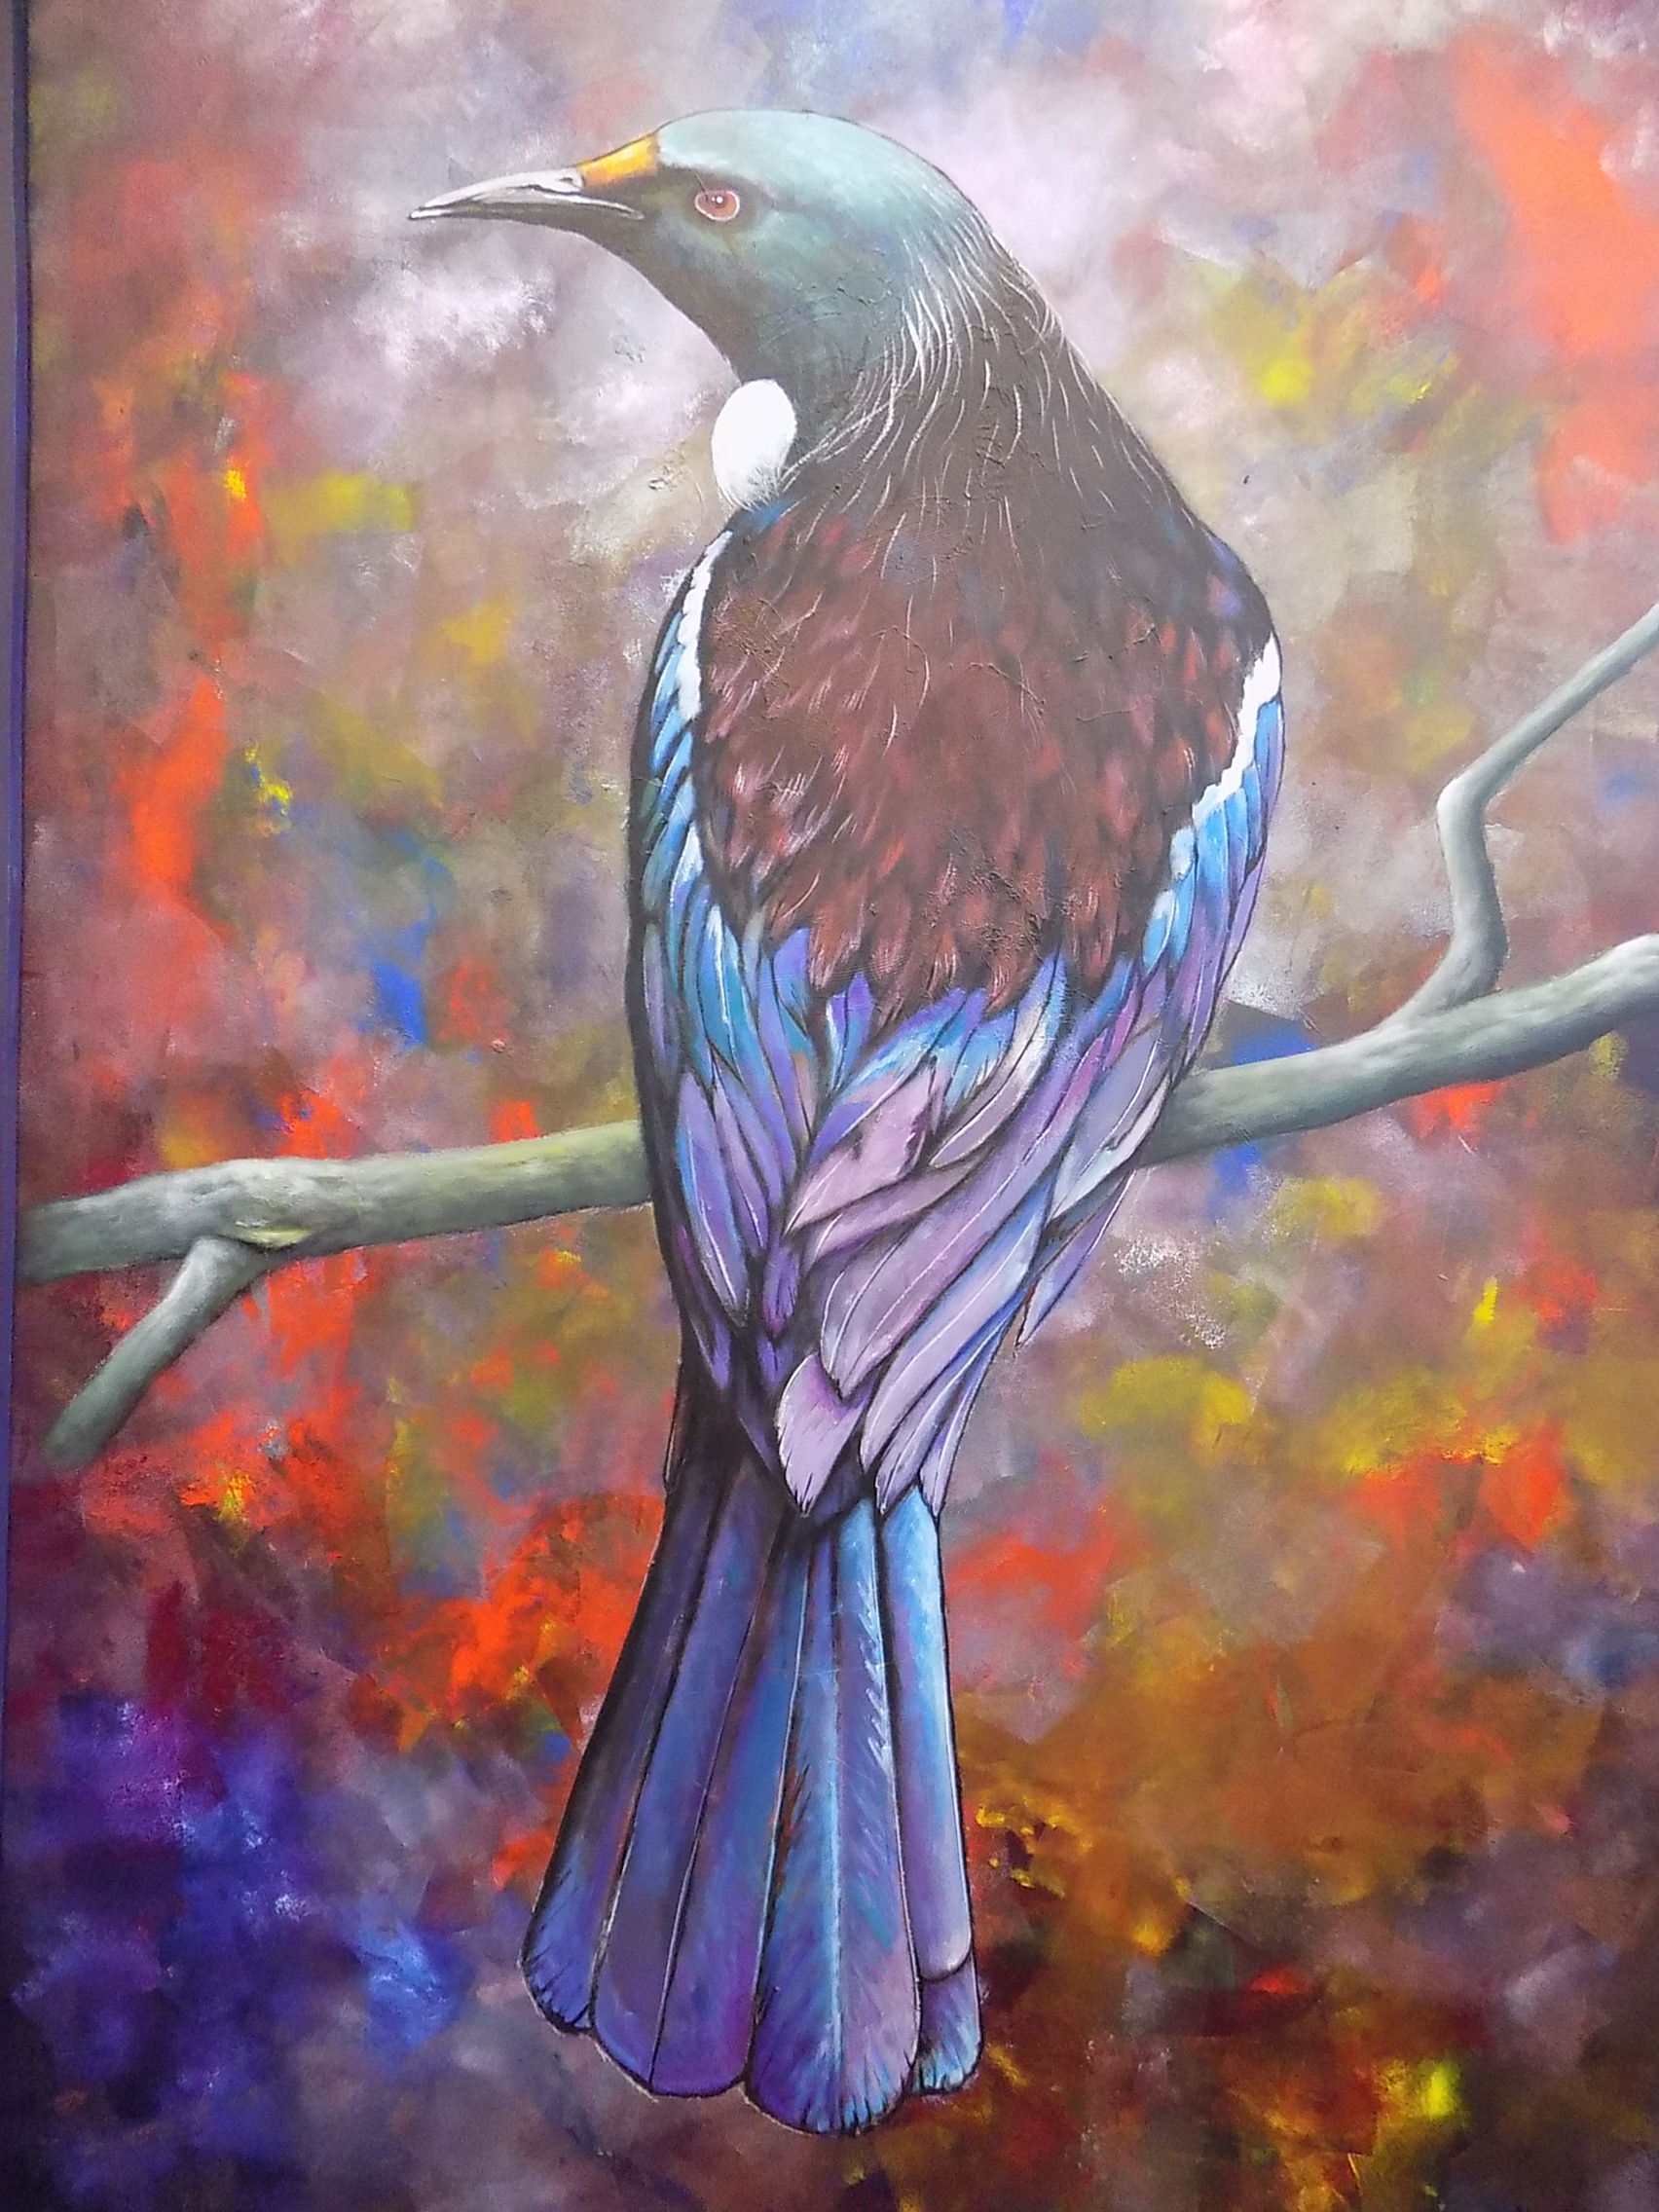 "Tui", created by a prisoner, fetched $1000